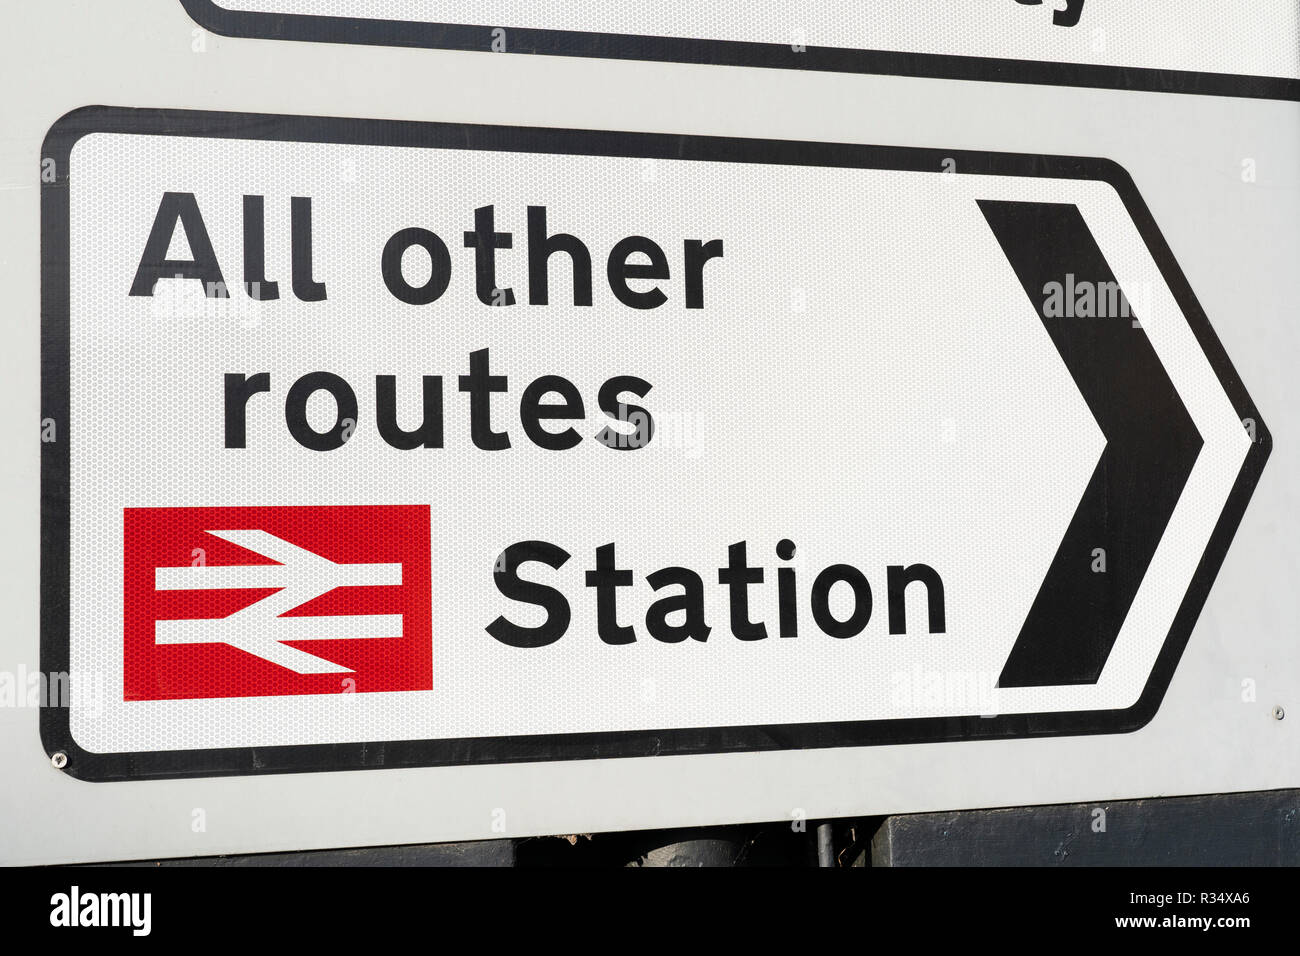 A Class 2 (high intensity) retroflective road sign in England with directions to a train station and all other routes Stock Photo